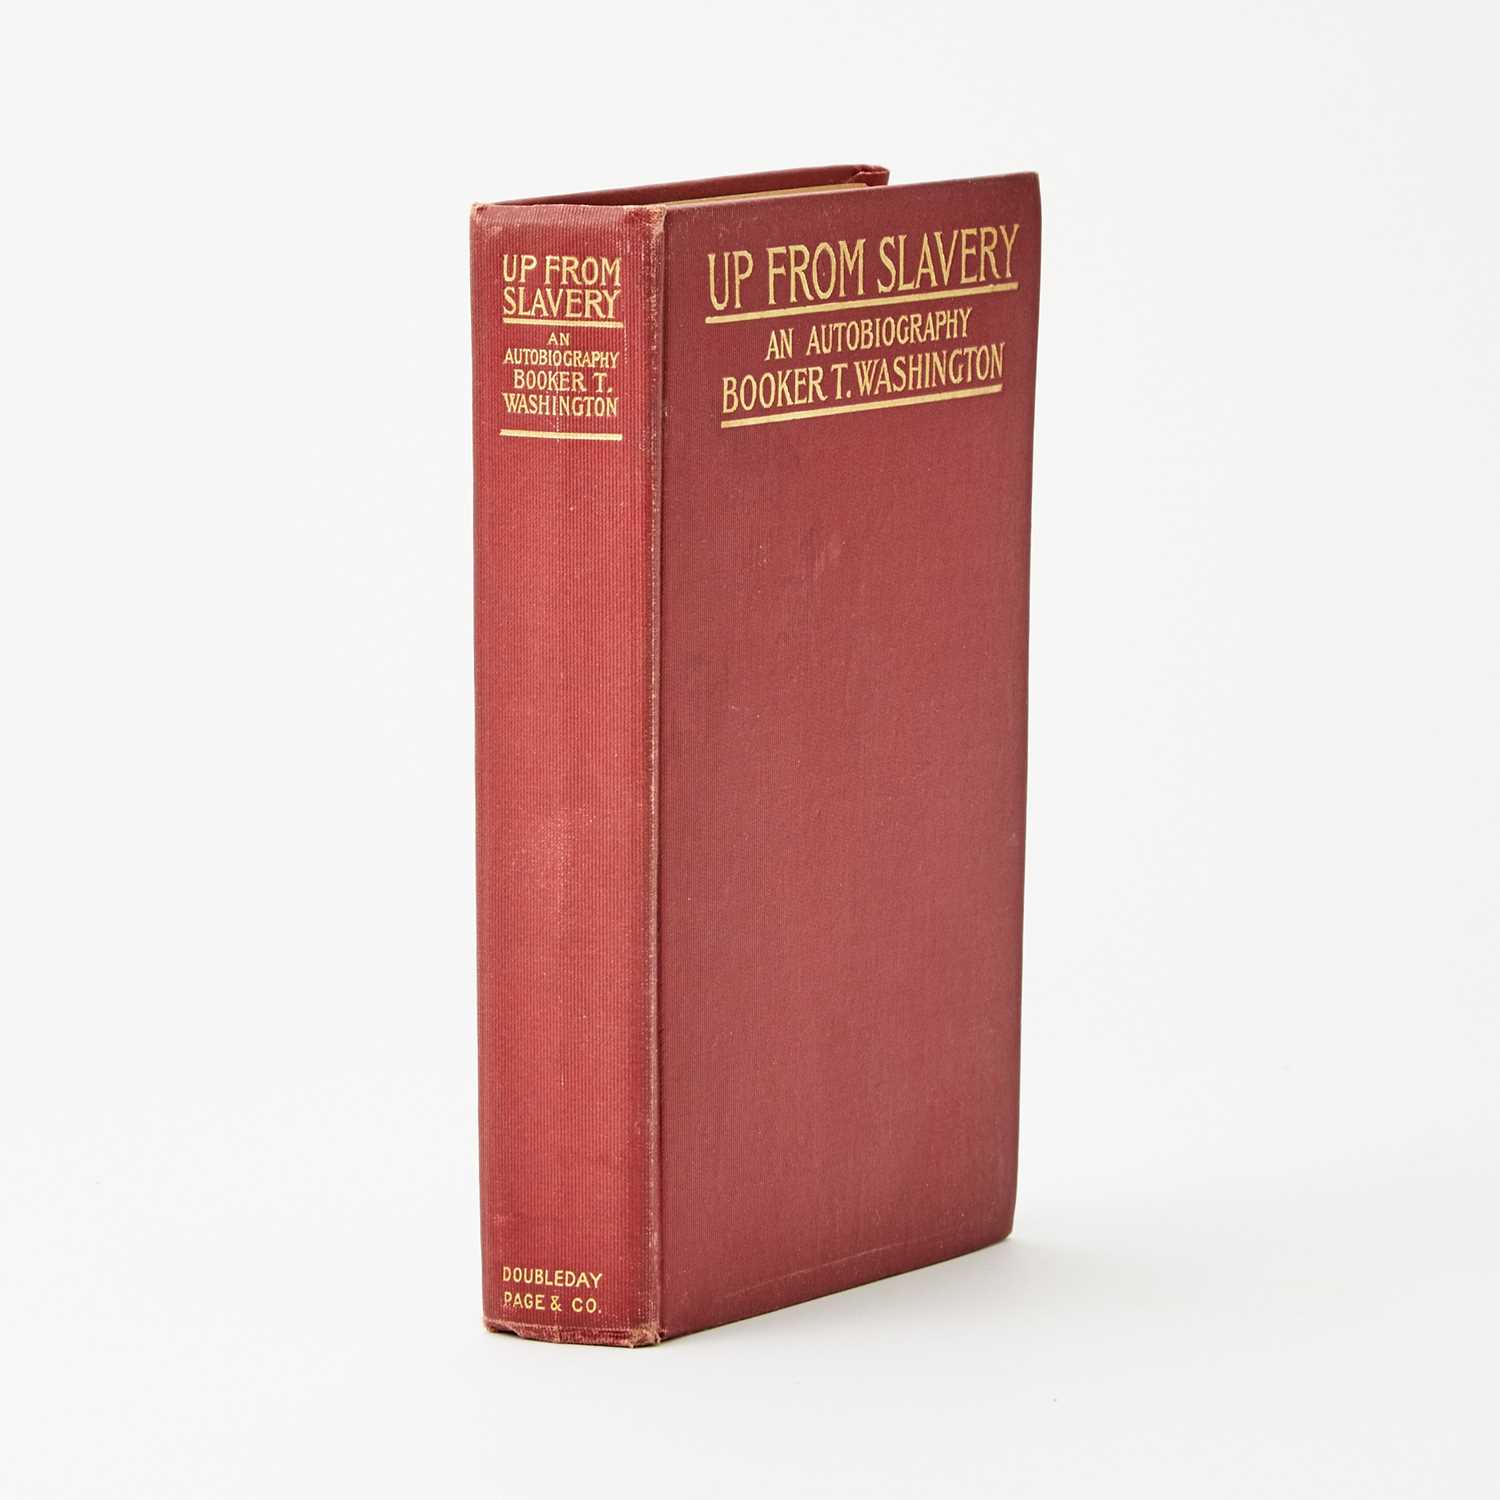 Lot 262 - The first edition of Booker T. Washington's autobiography